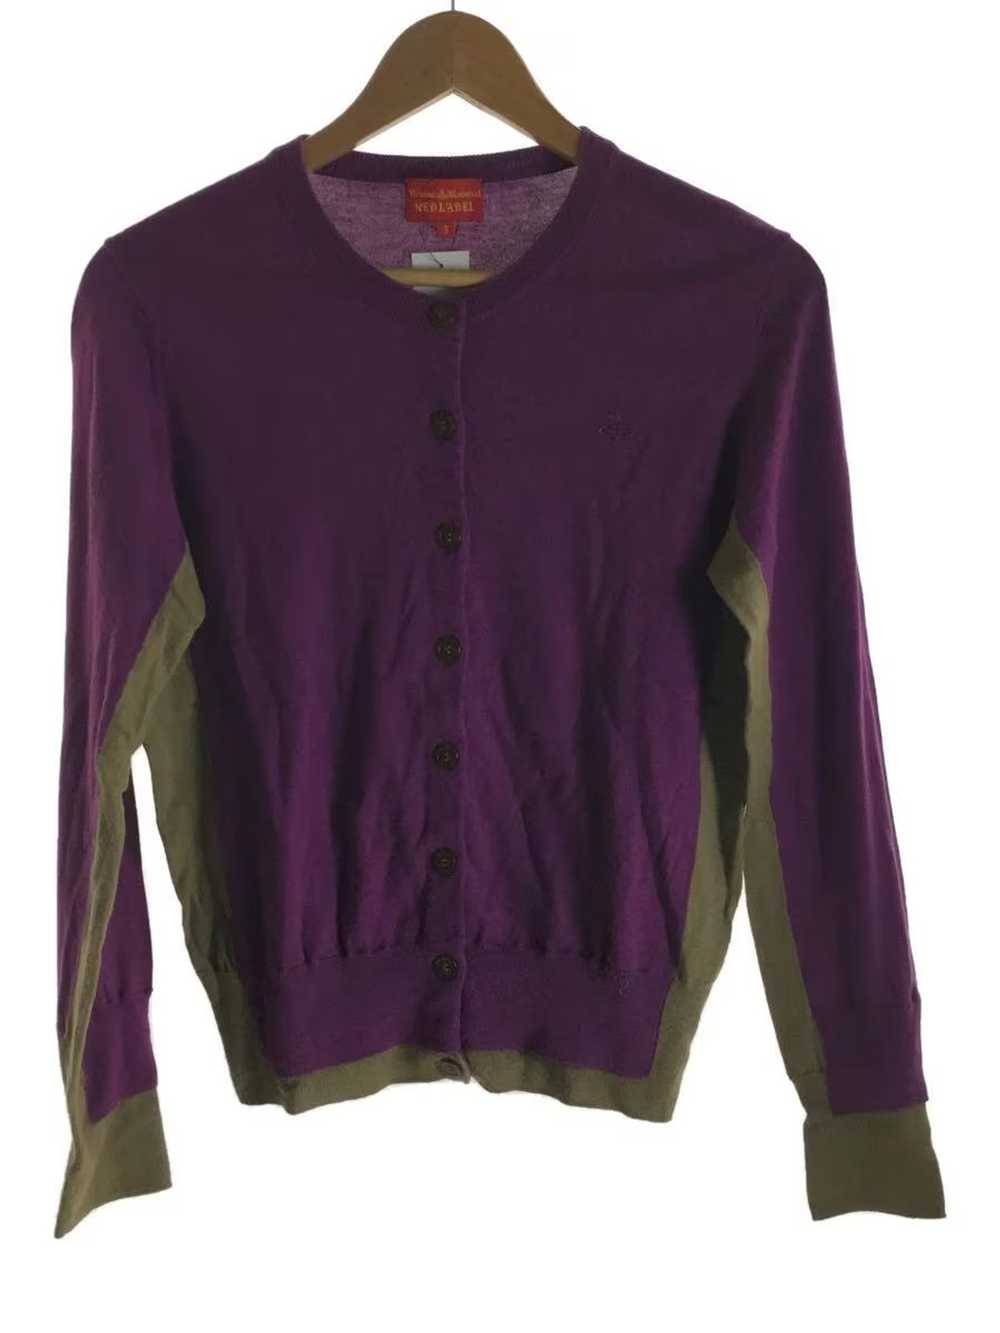 Vivienne Westwood Reconstructed Orb Knit Cardigan - image 1